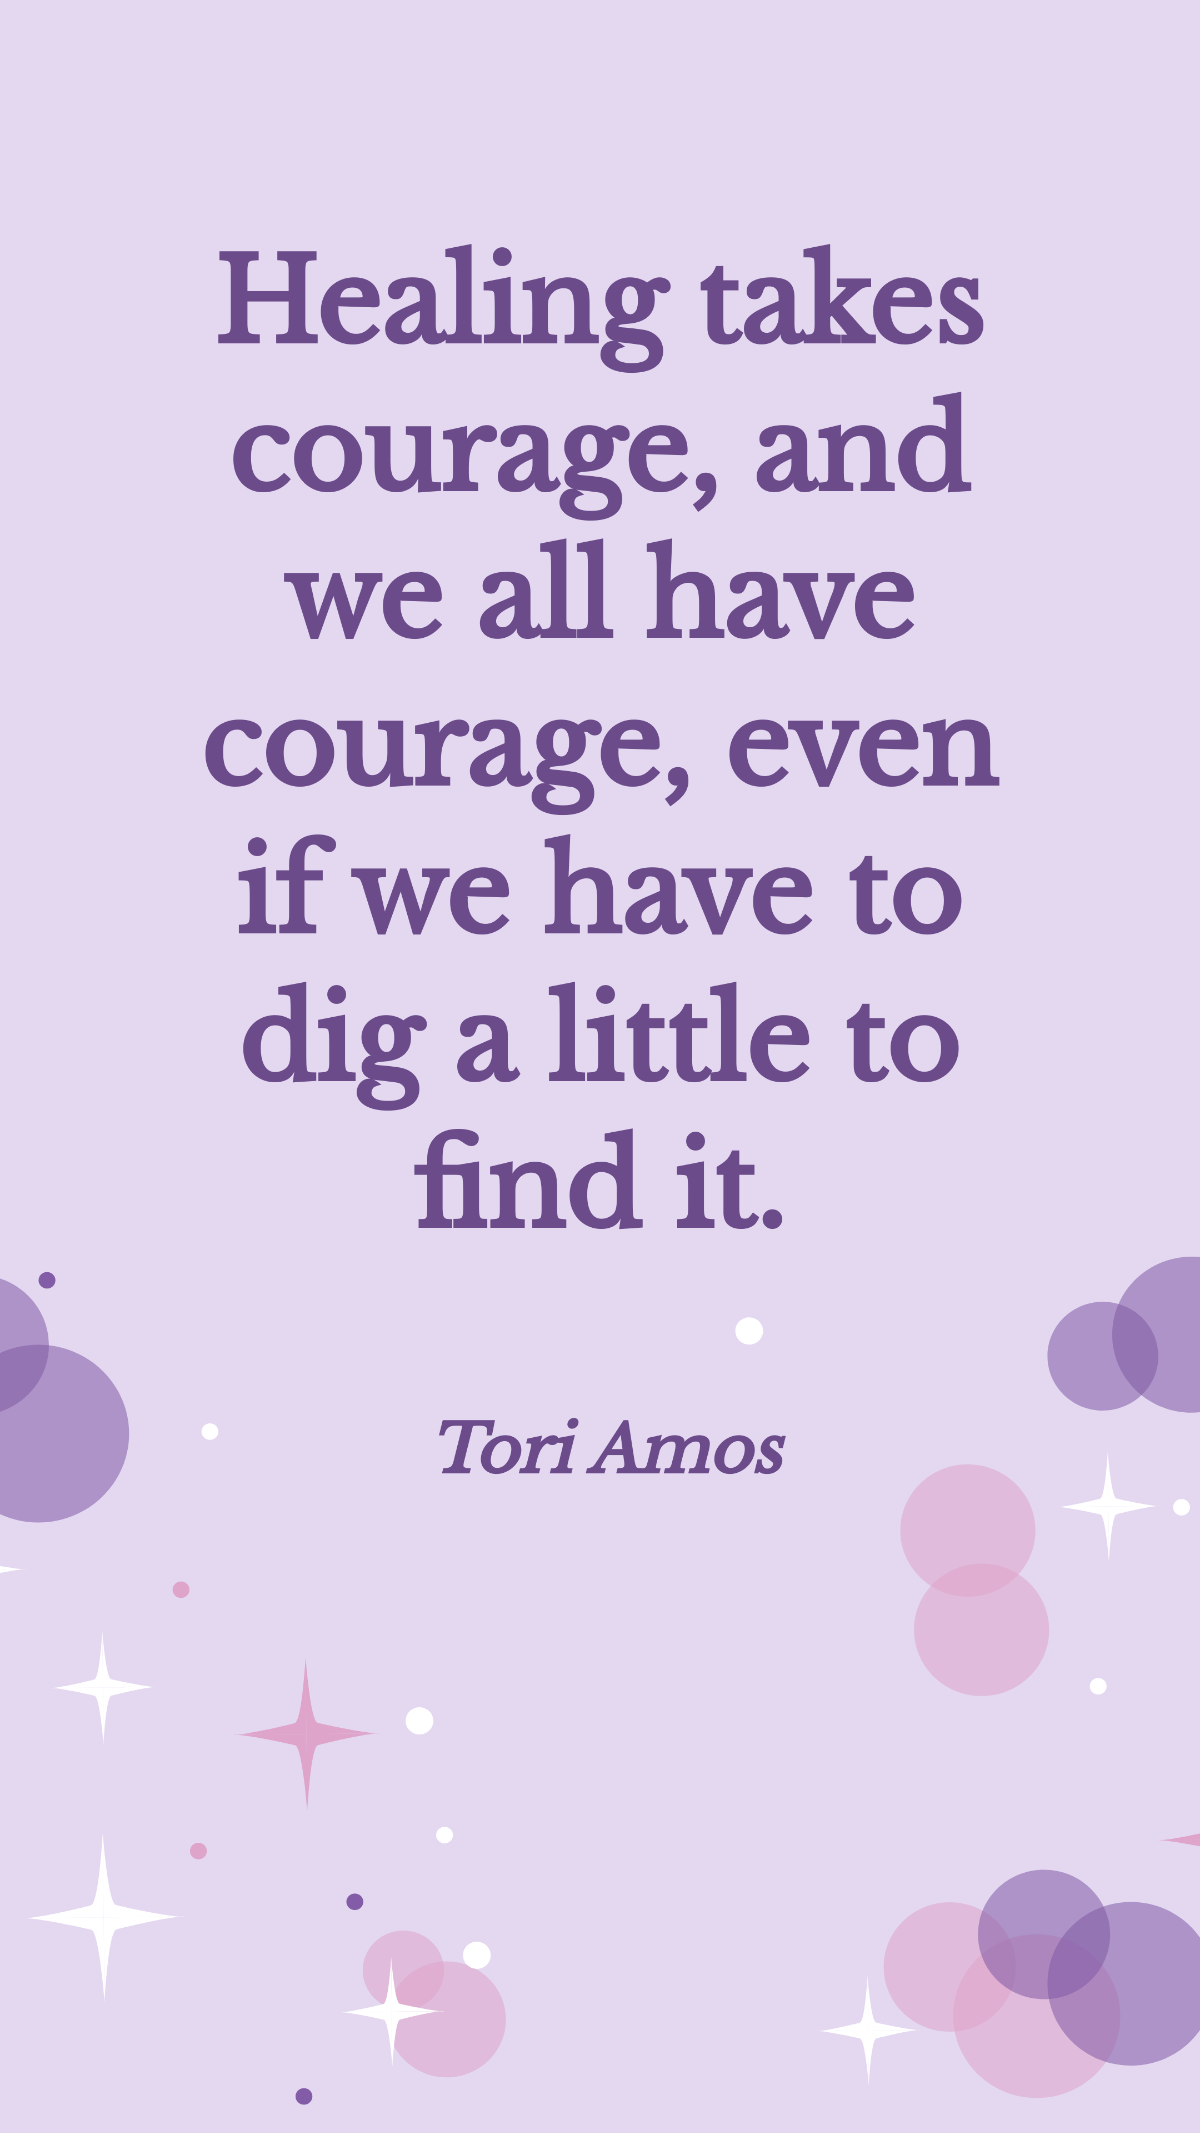 Tori Amos - Healing takes courage, and we all have courage, even if we have to dig a little to find it. Template